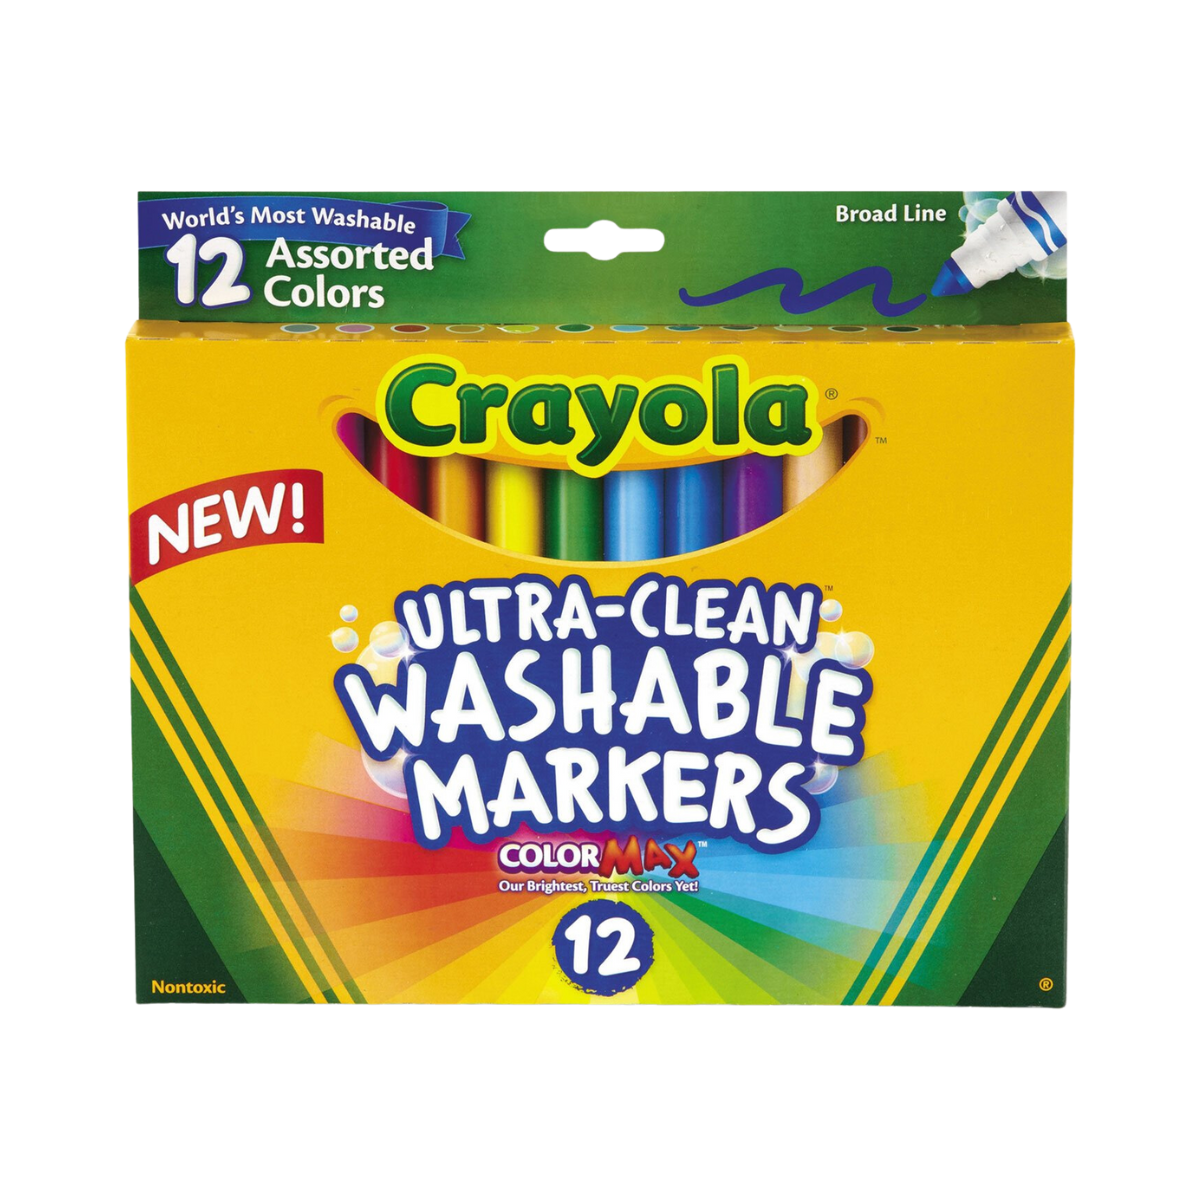 12 Ultra-Clean Washable Markers